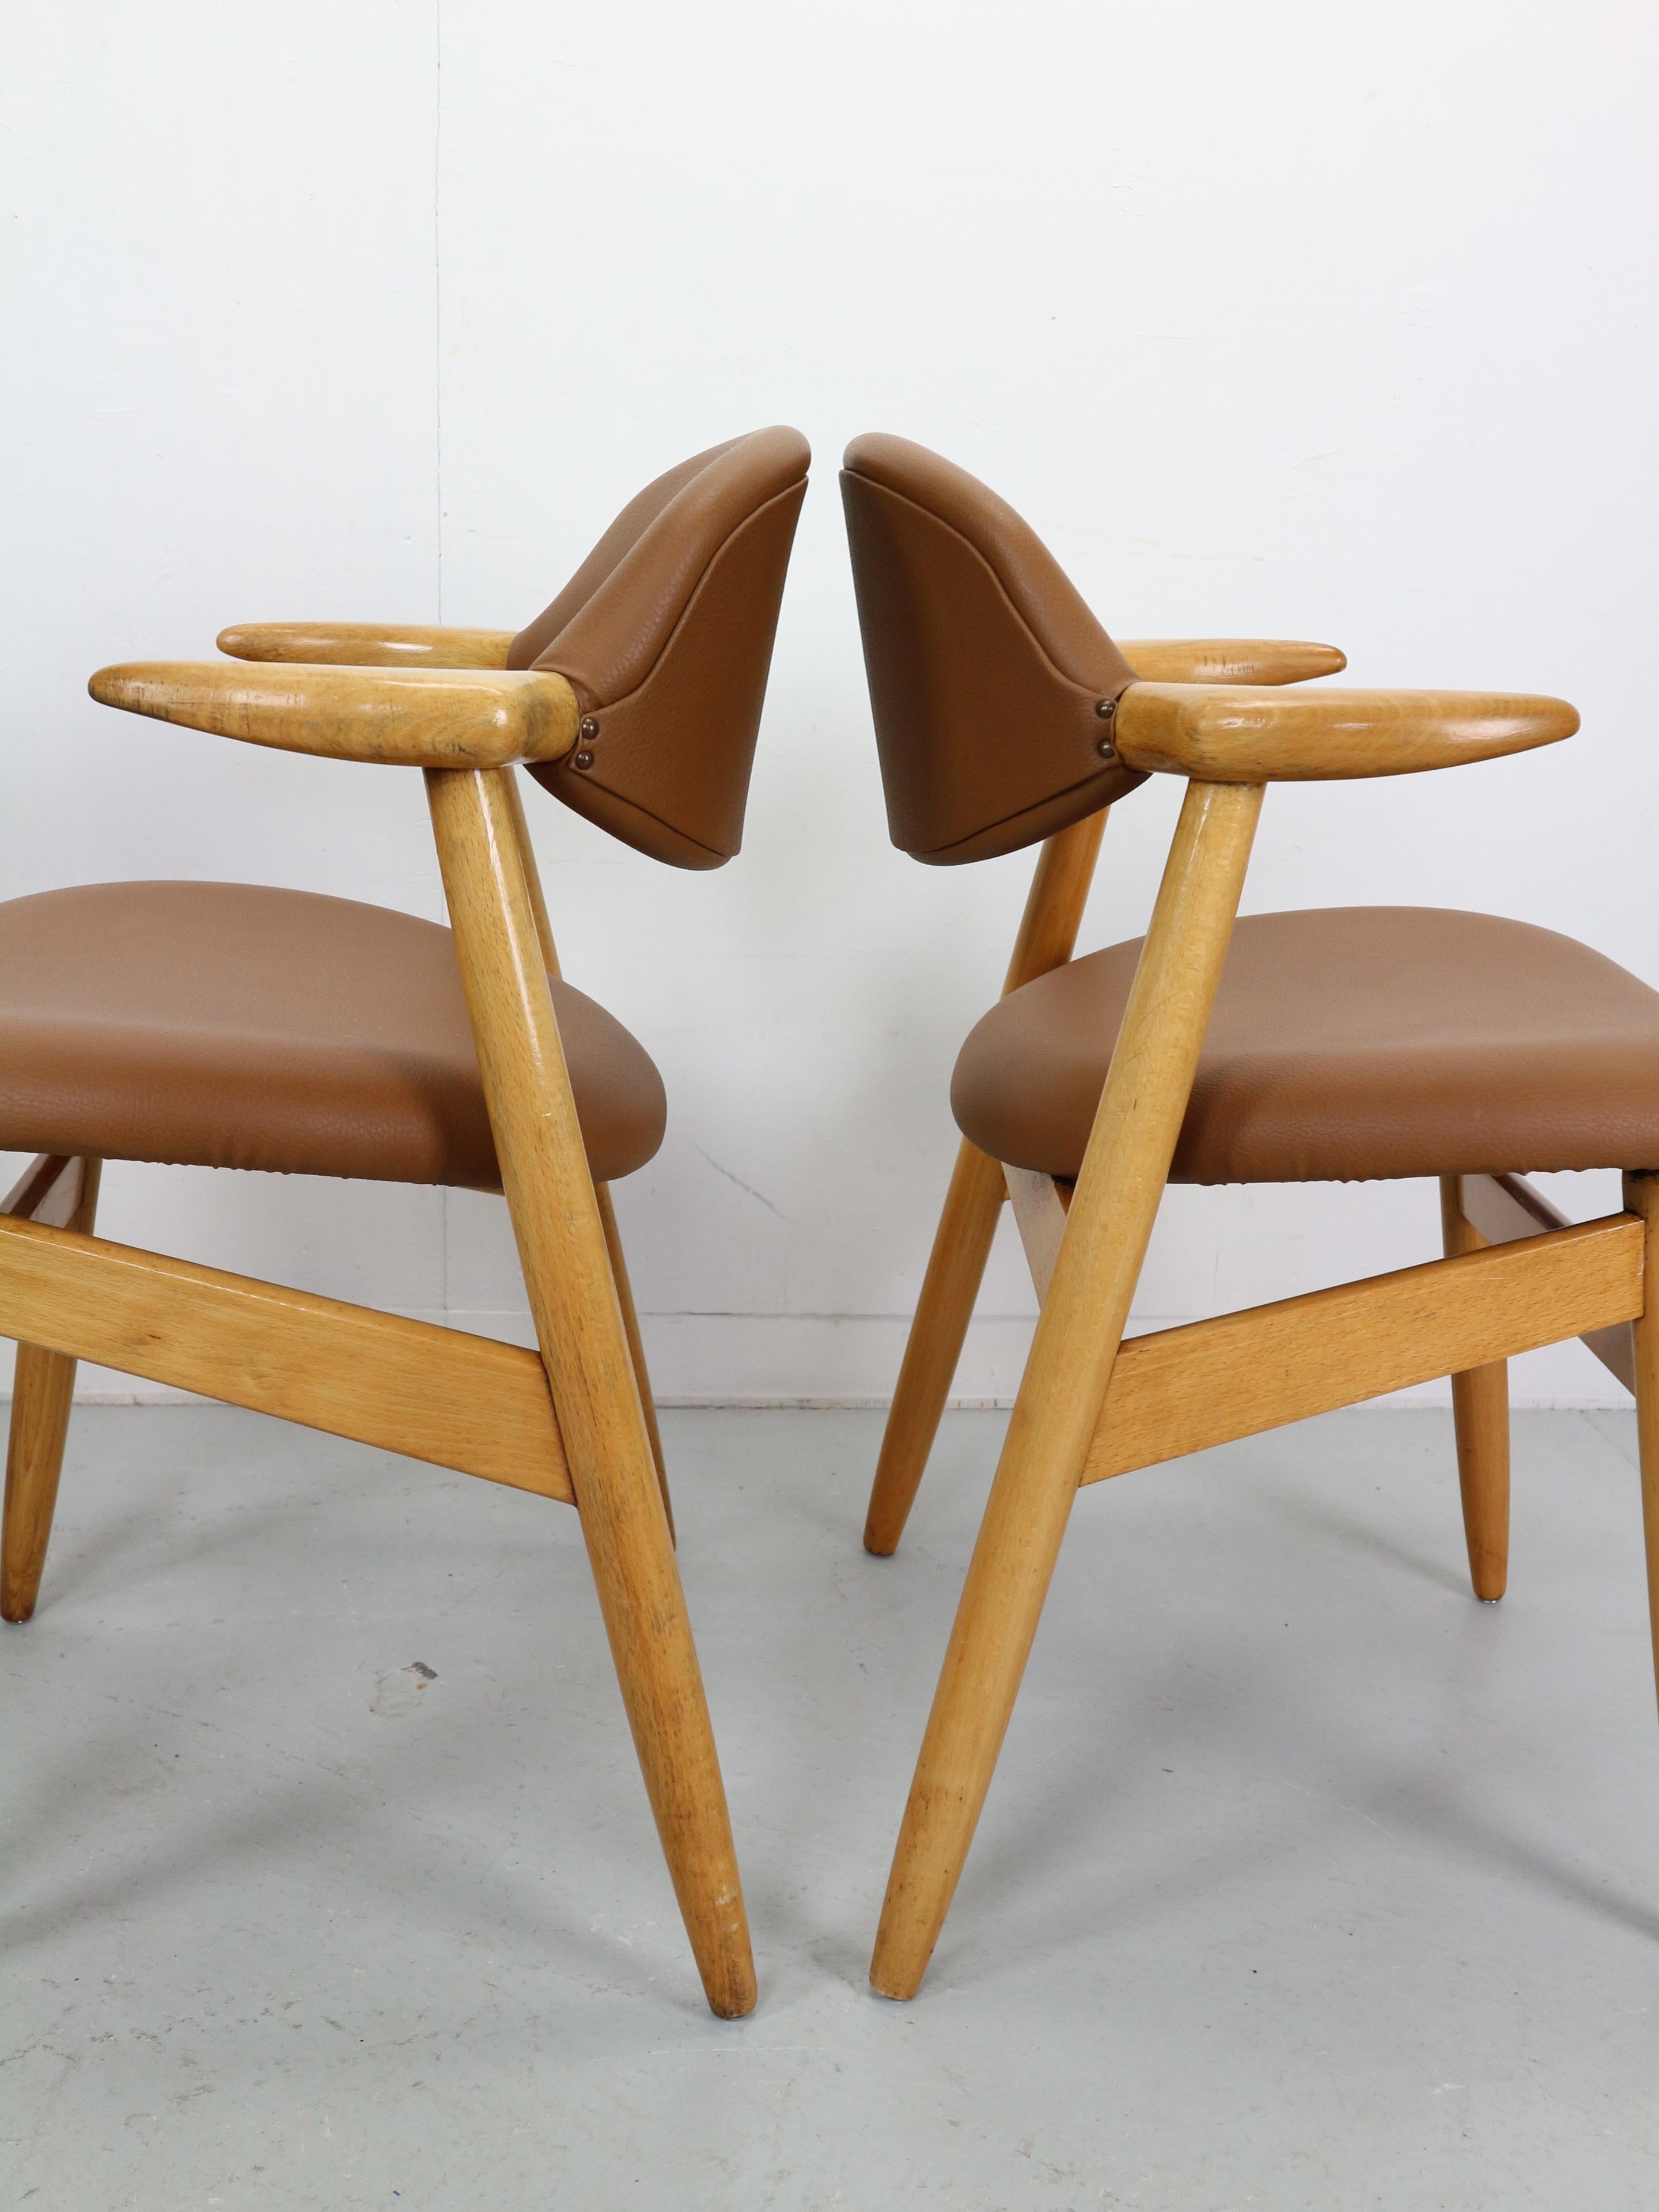 Set of 4 Tijsseling Cowhorn Chair Propos Hulmefa, the Netherlands, 1960 11